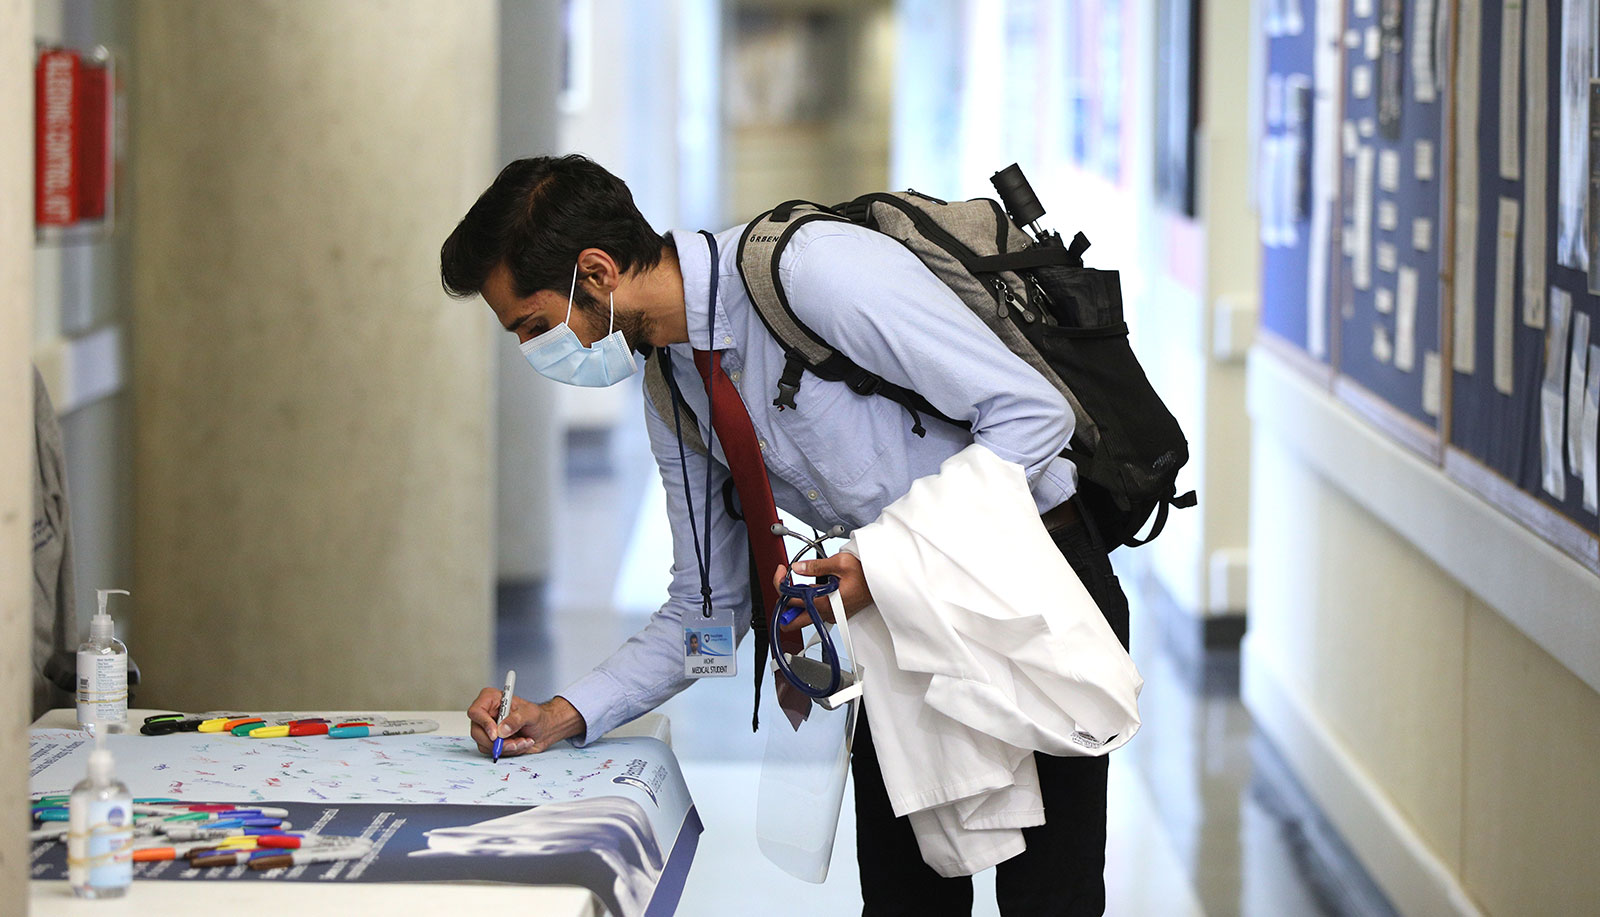 A man wearing a face mask and carrying a white medical student coat uses a marker to sign a large banner laying on a table.